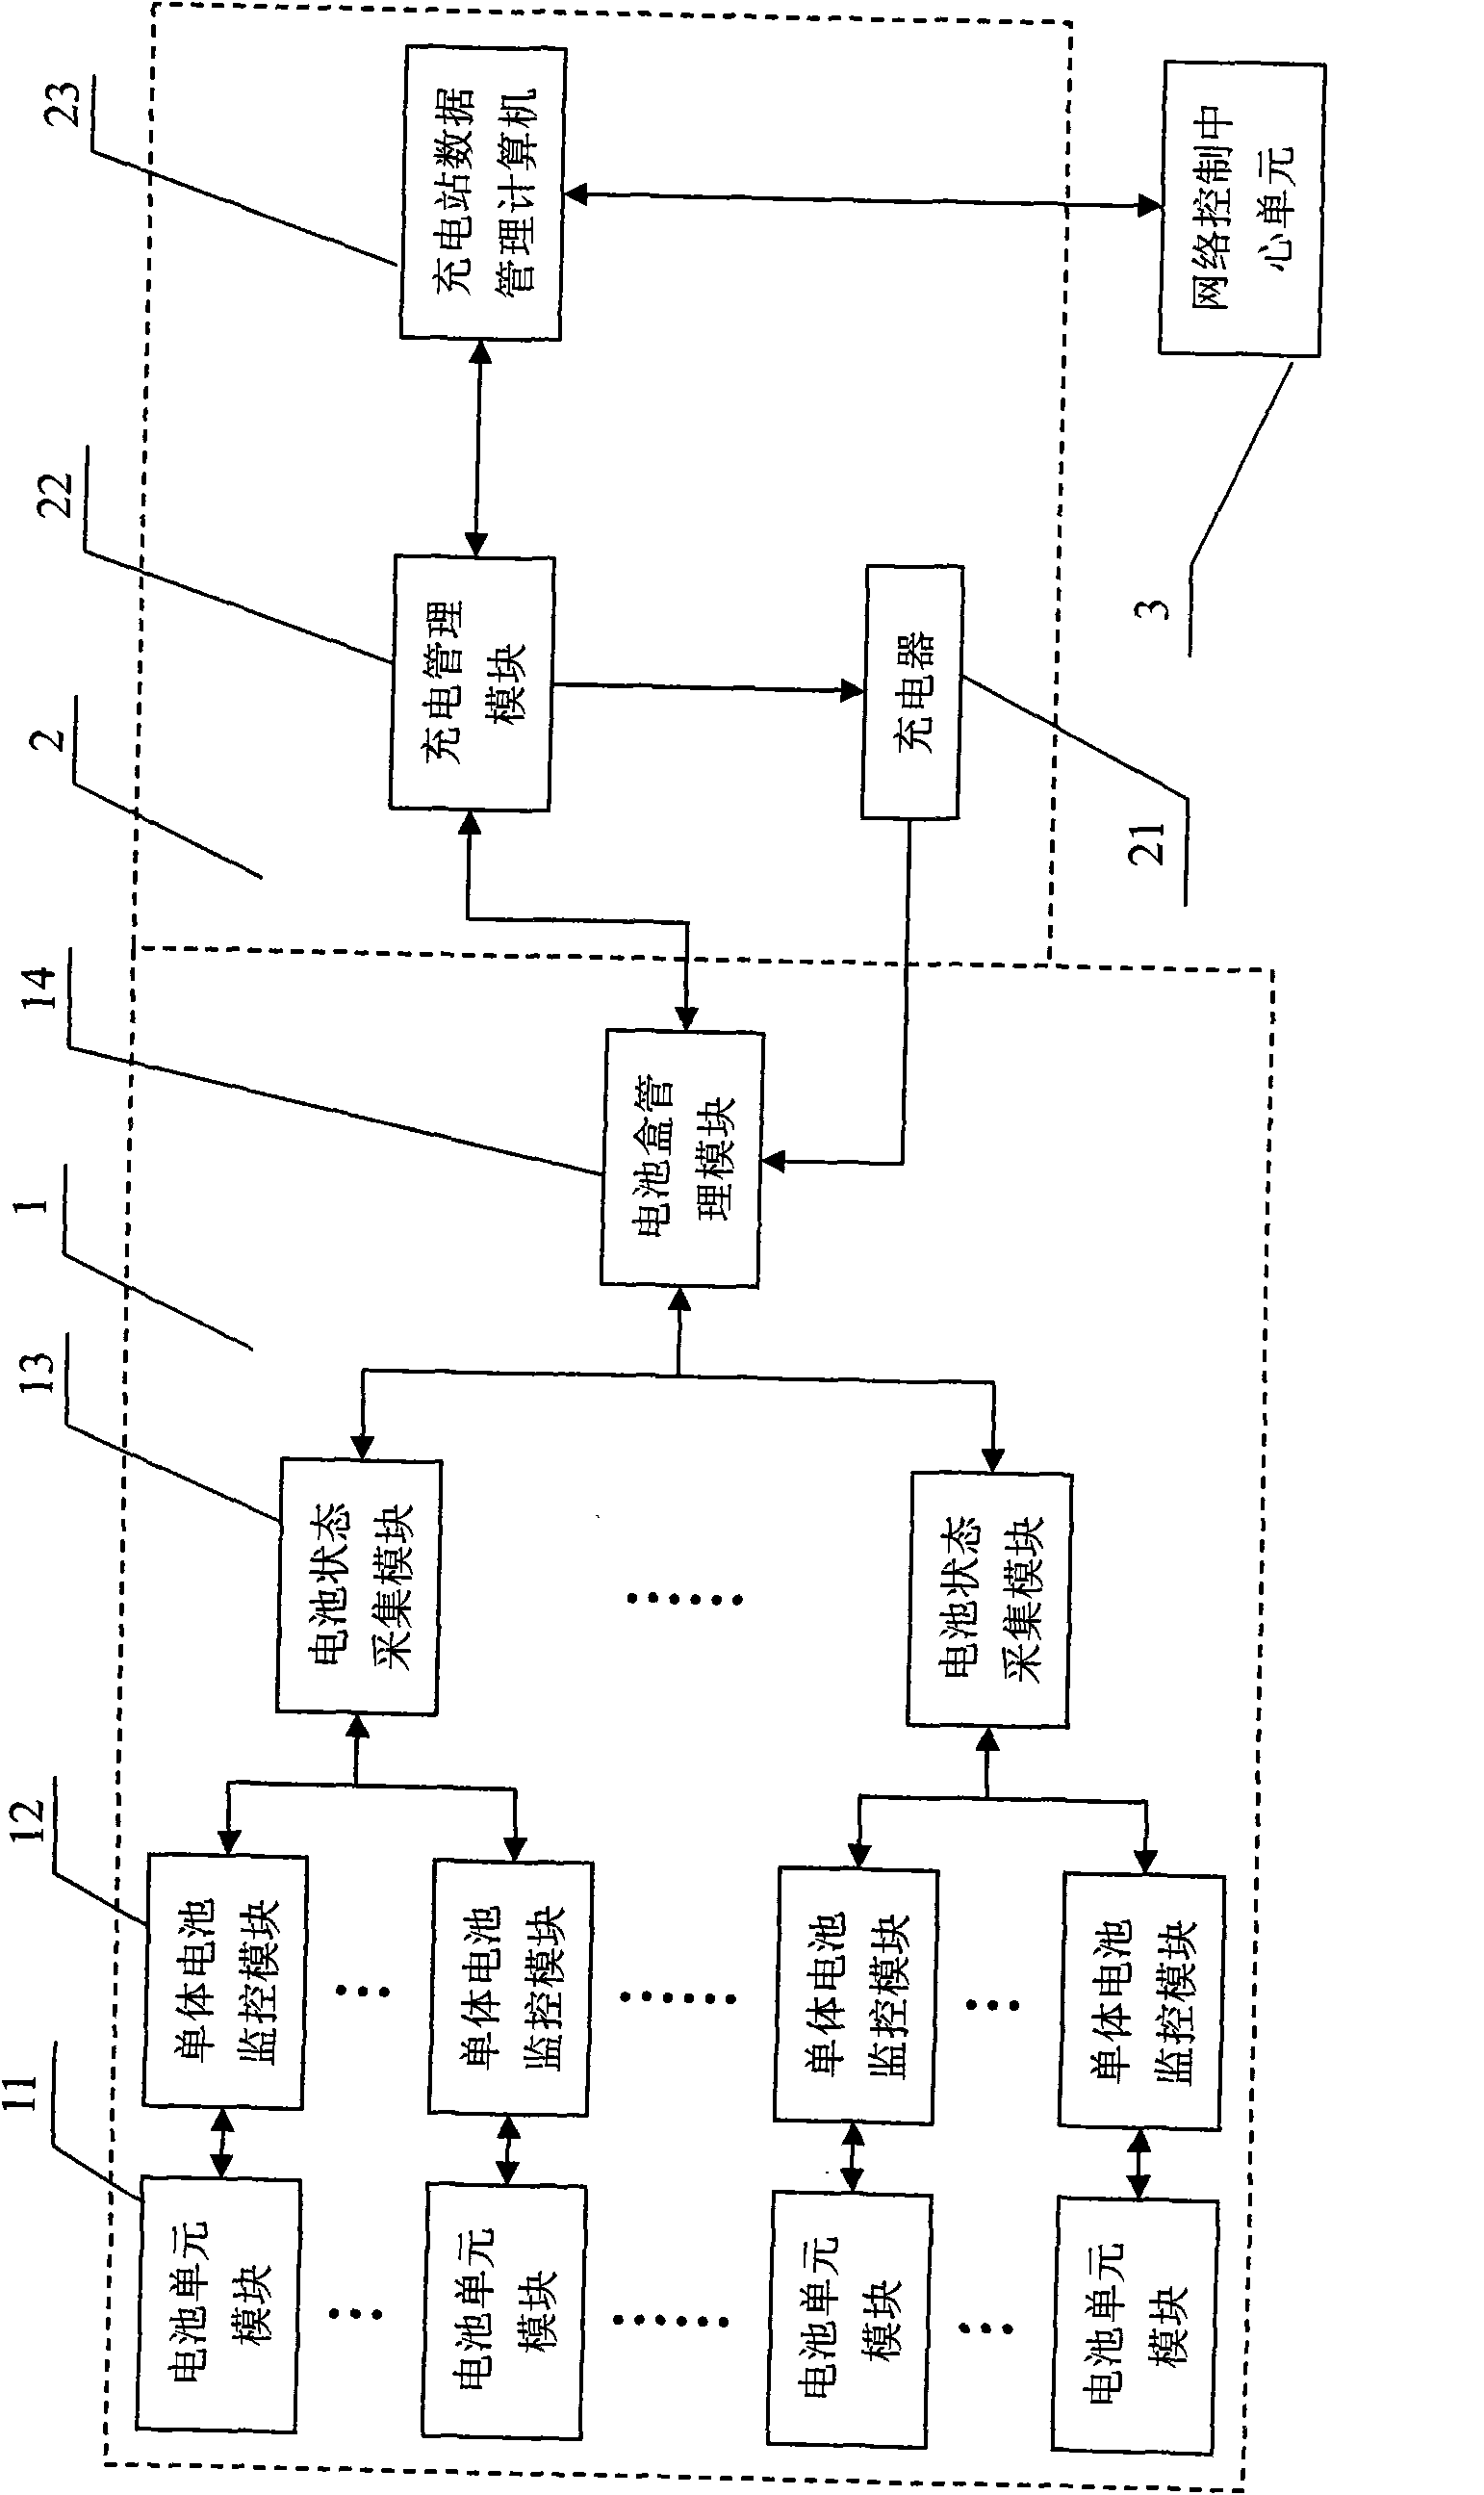 System for managing continuous status of batteries of electric motorcar